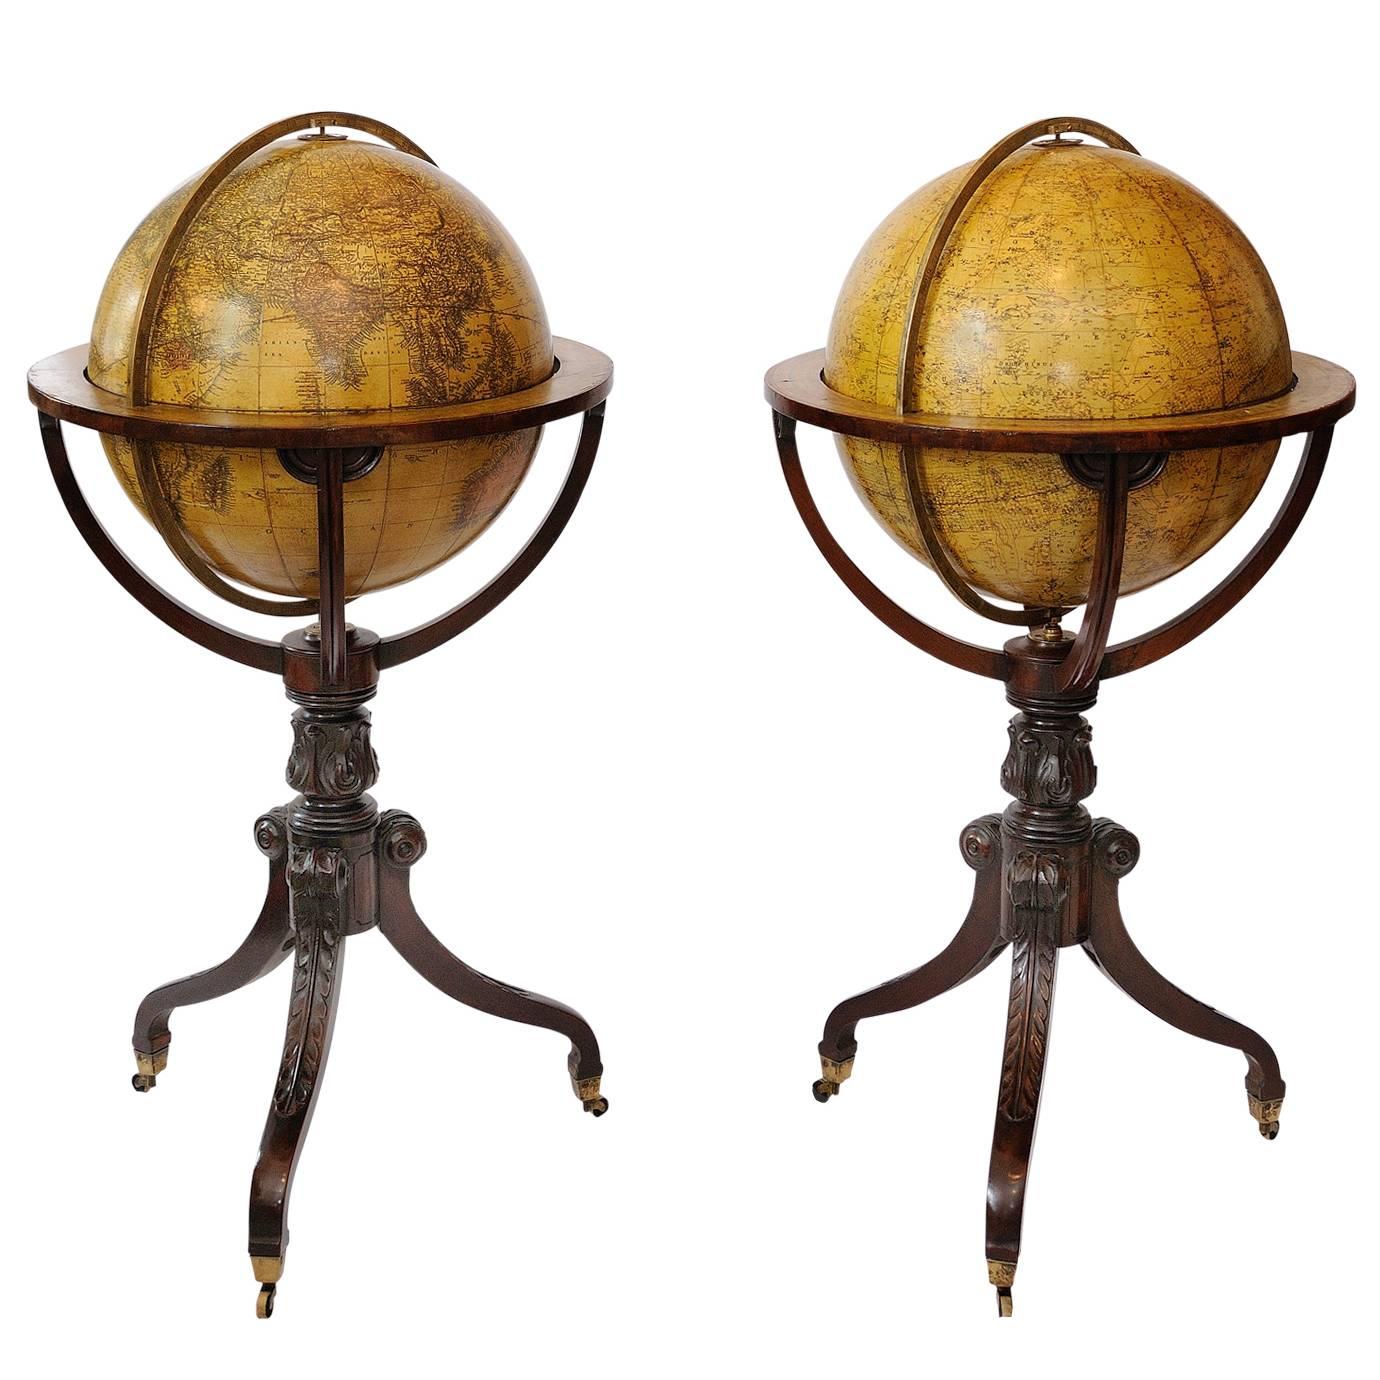 Pair of early 19th Century Regency Globe Stands, circa 1820 For Sale